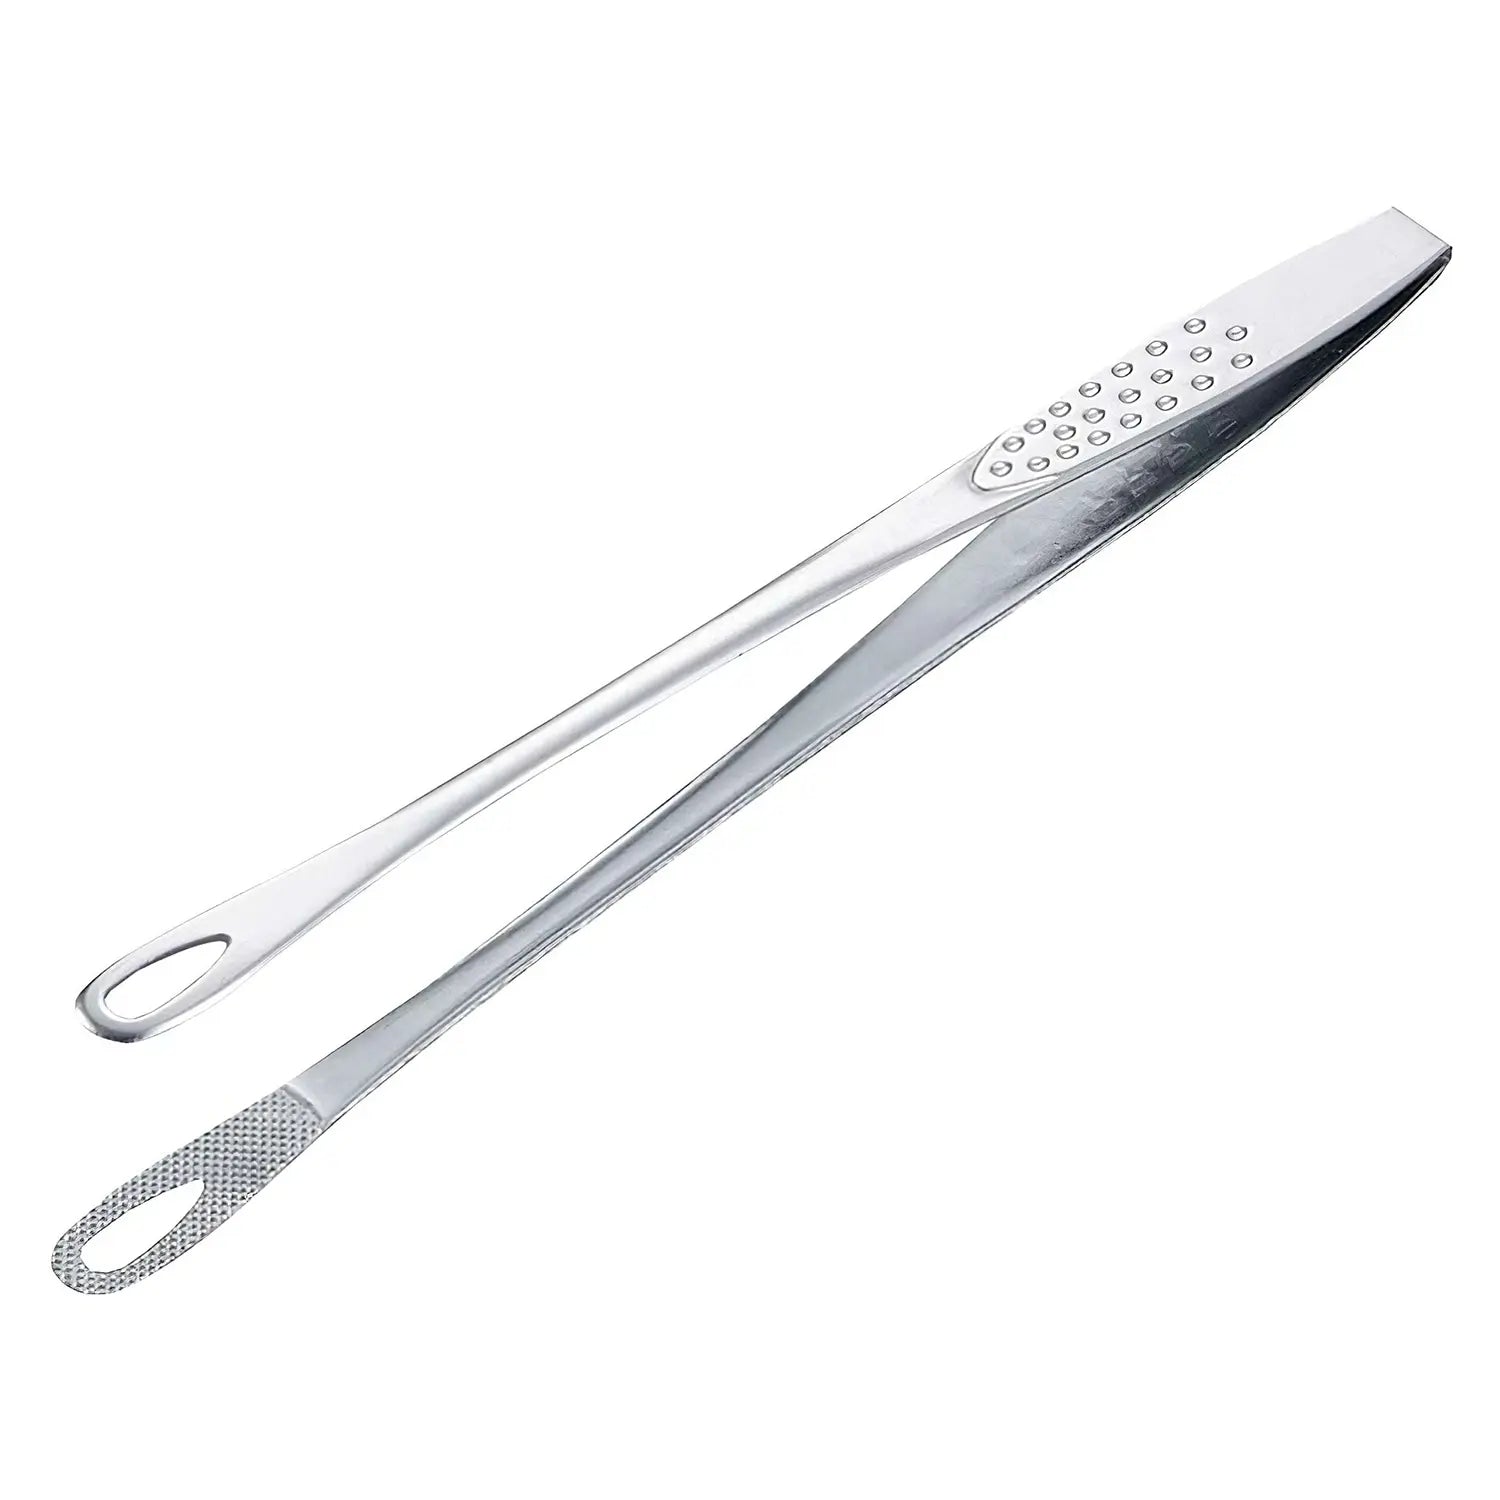 EBM Stainless-Steel Clever Tongs